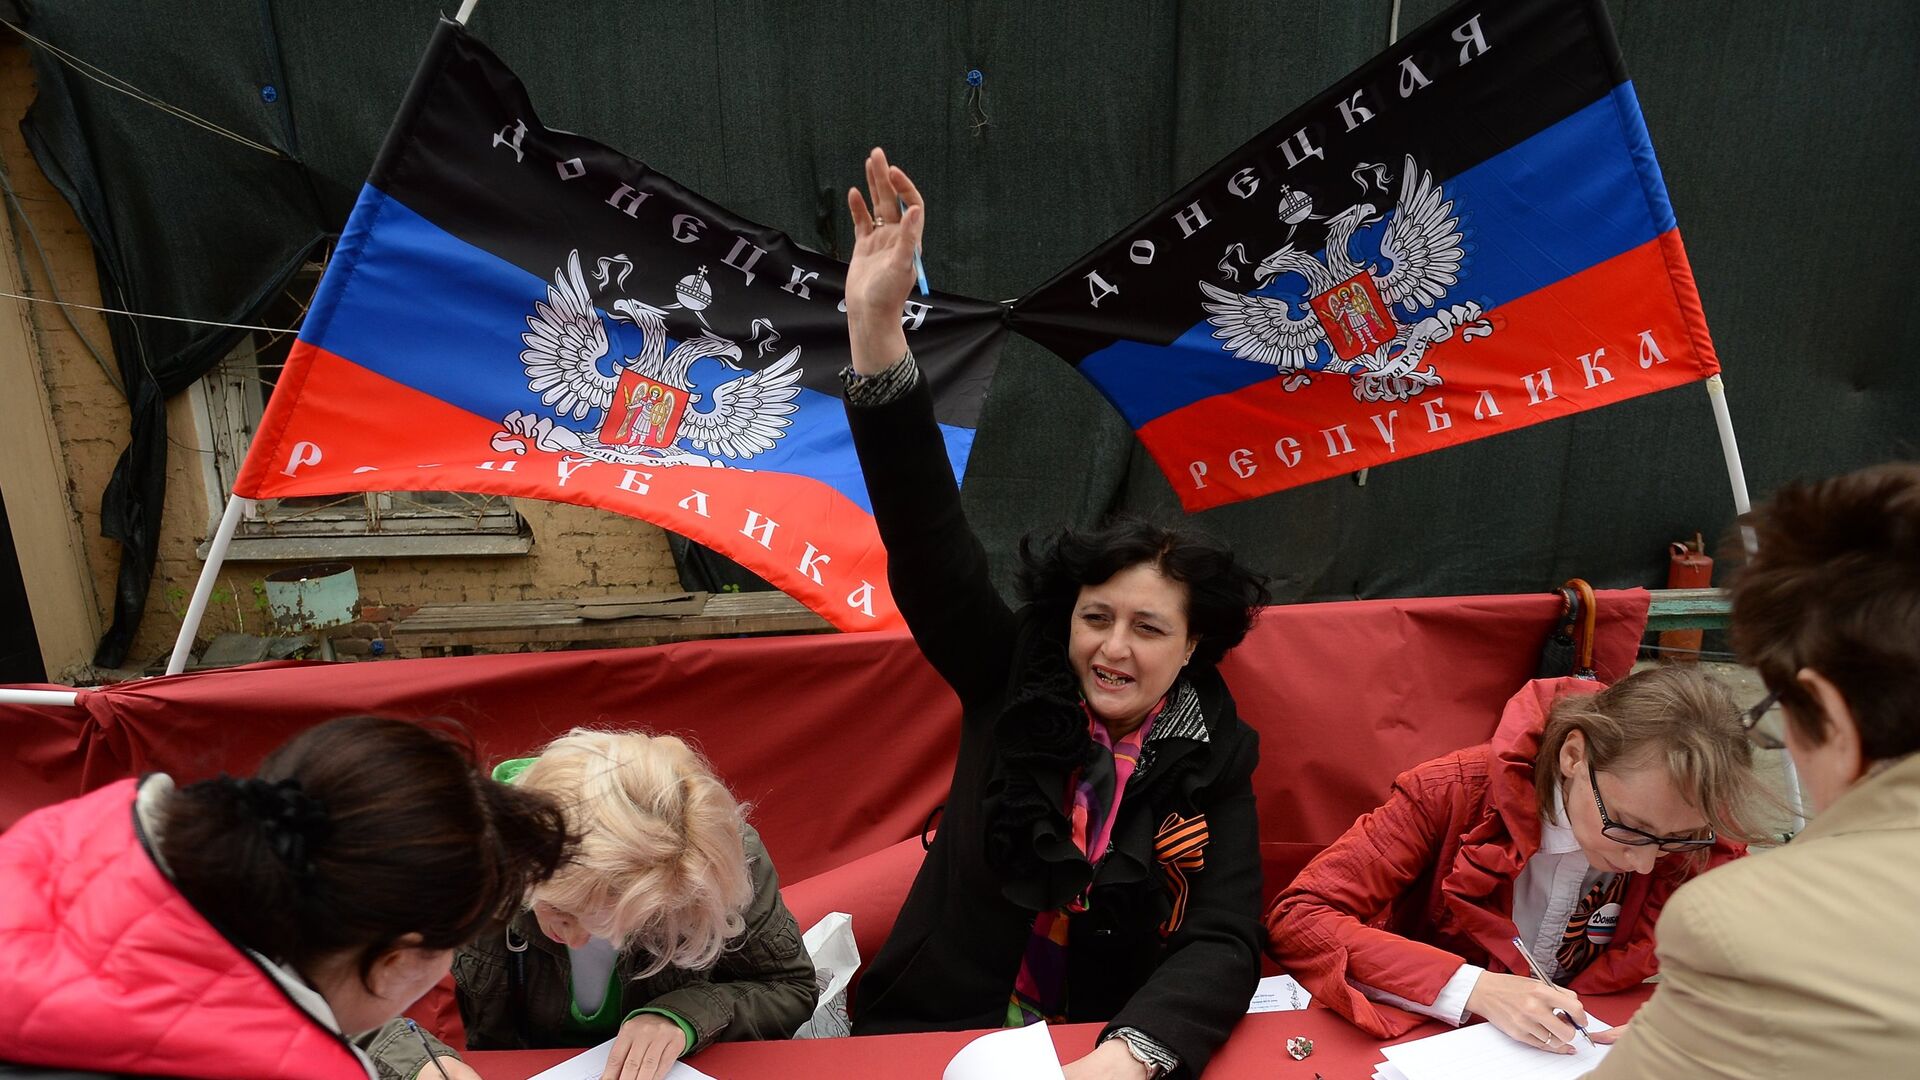 Donbass residents vote in the referendum on the status of the self-proclaimed Donetsk People's Republic at a polling station in Moscow - Sputnik International, 1920, 11.04.2022